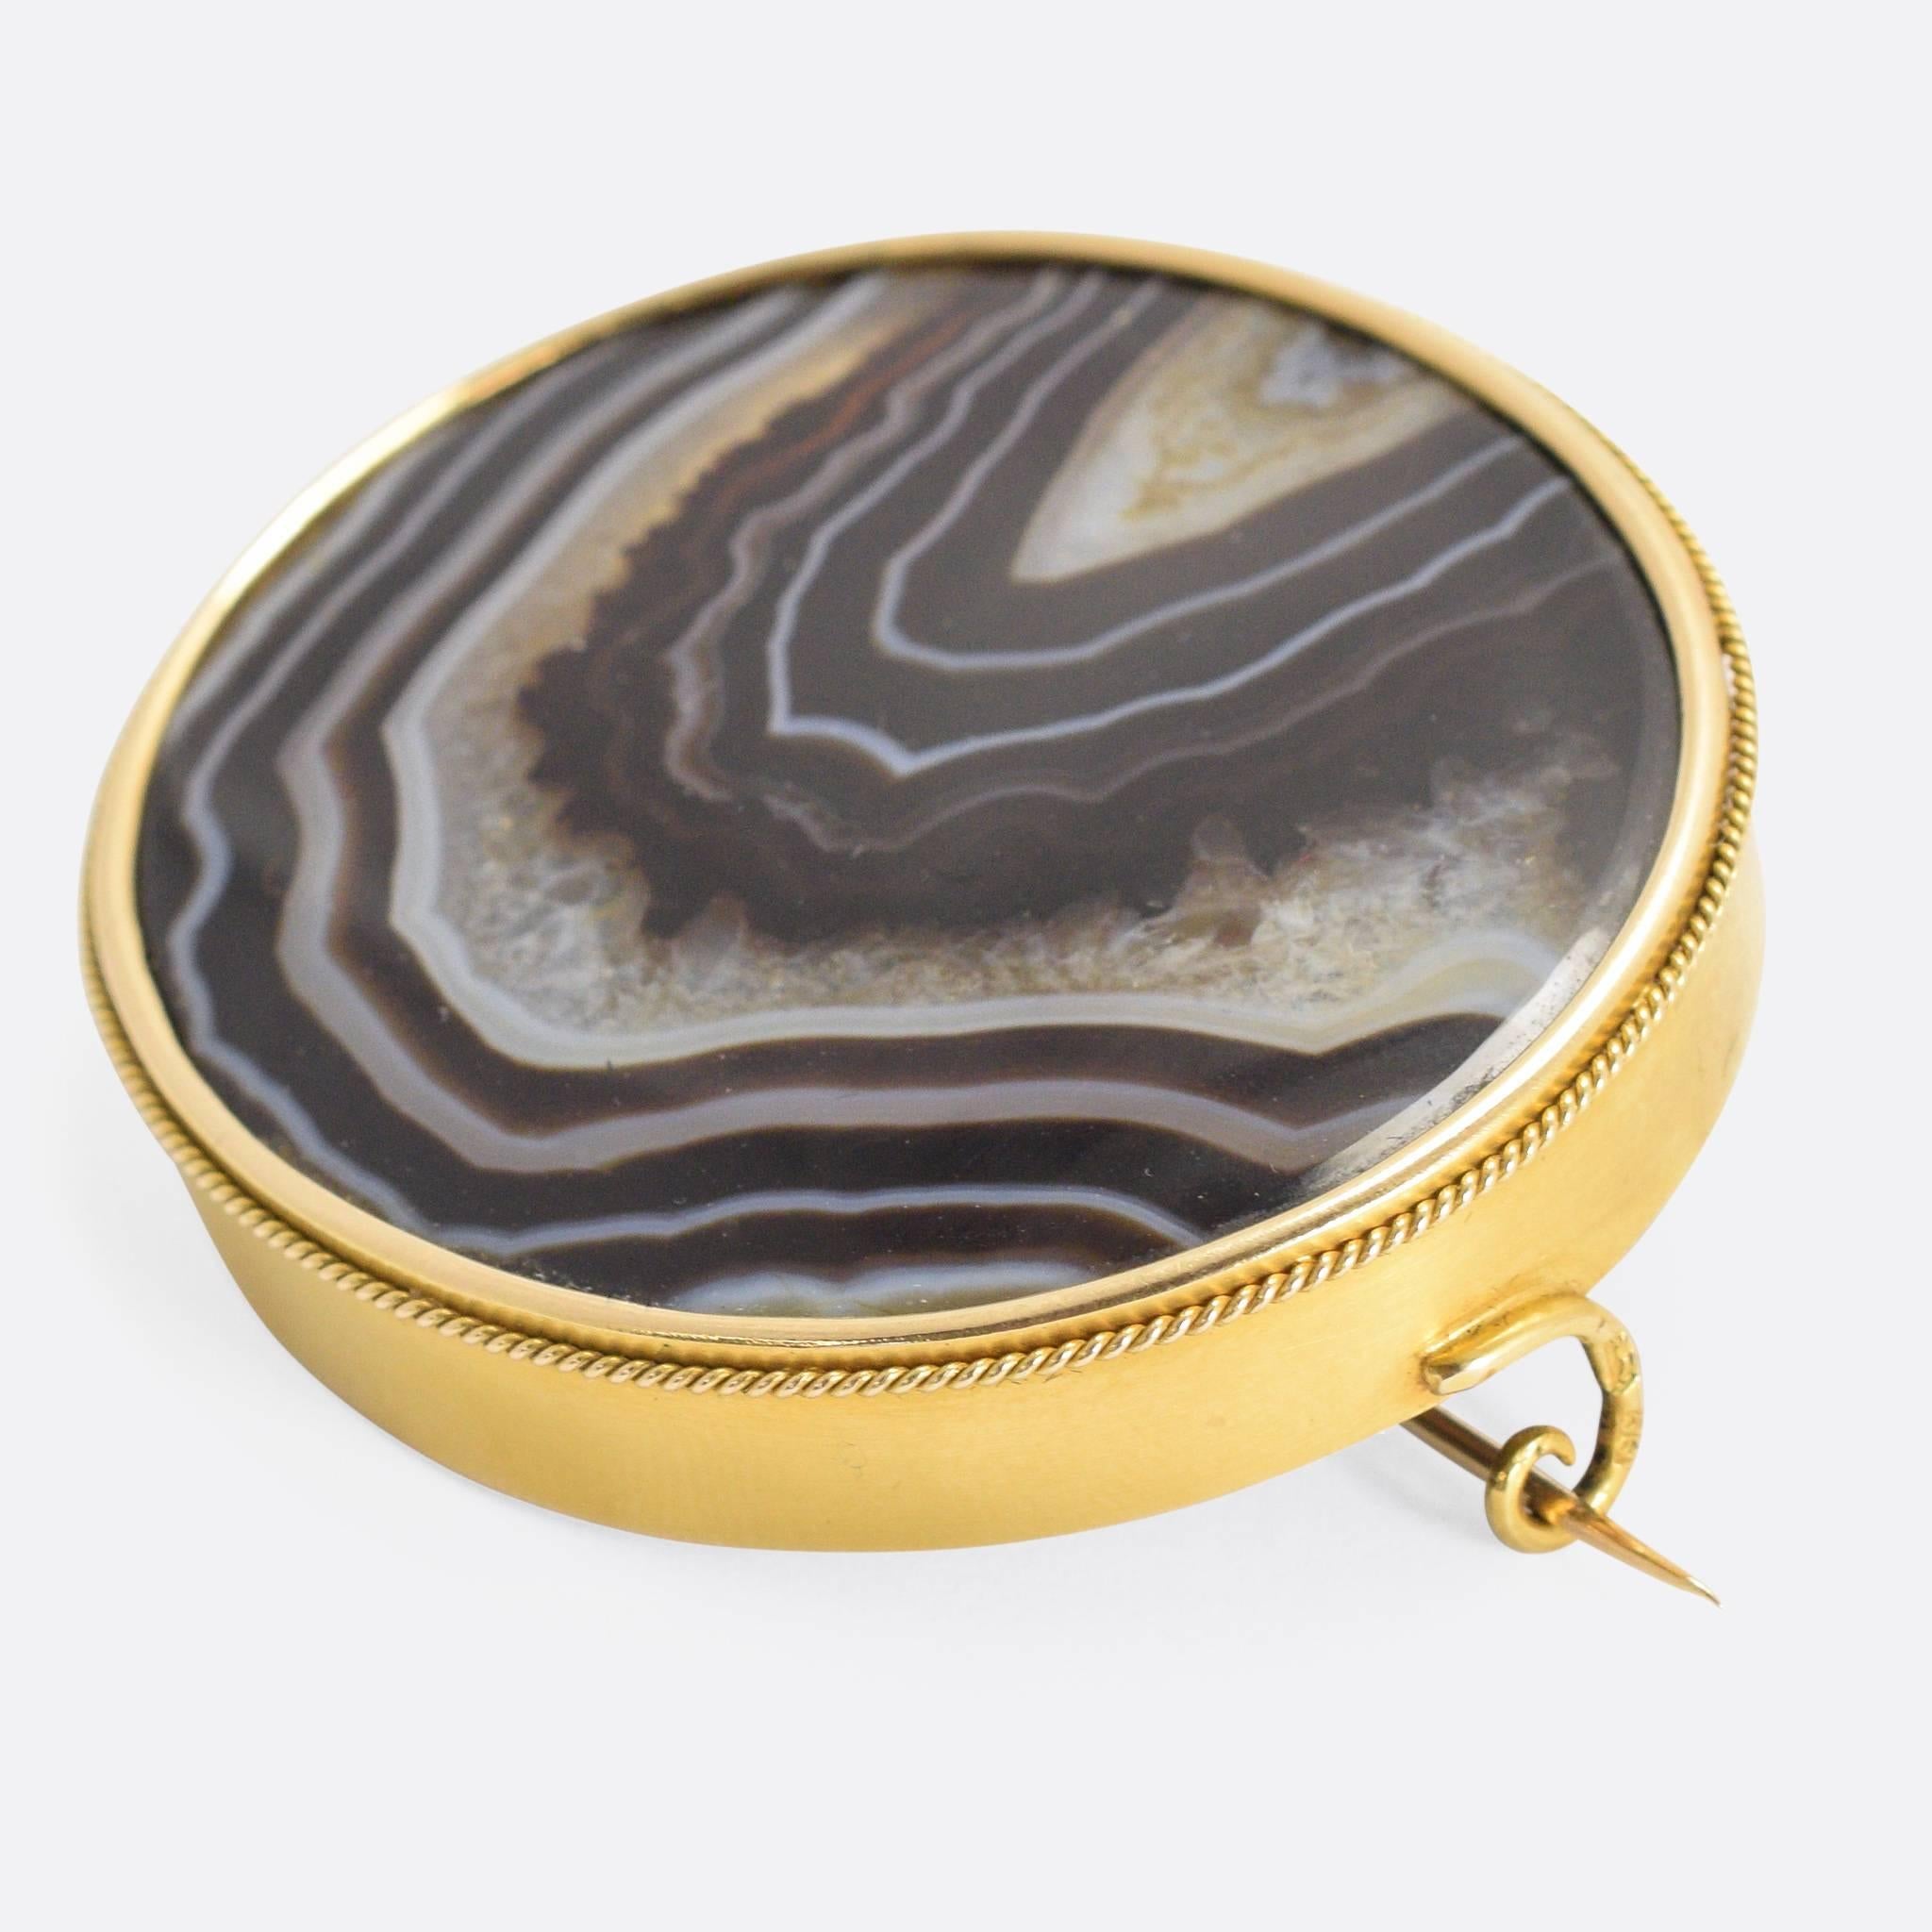 An incredibly high quality Russian brooch set with the largest single piece of banded agate I have ever seen in a piece of jewellery. The gold mount is a beautiful 56 zolotnik (14 karat) yellow gold with a rope work style surround. Offered in its